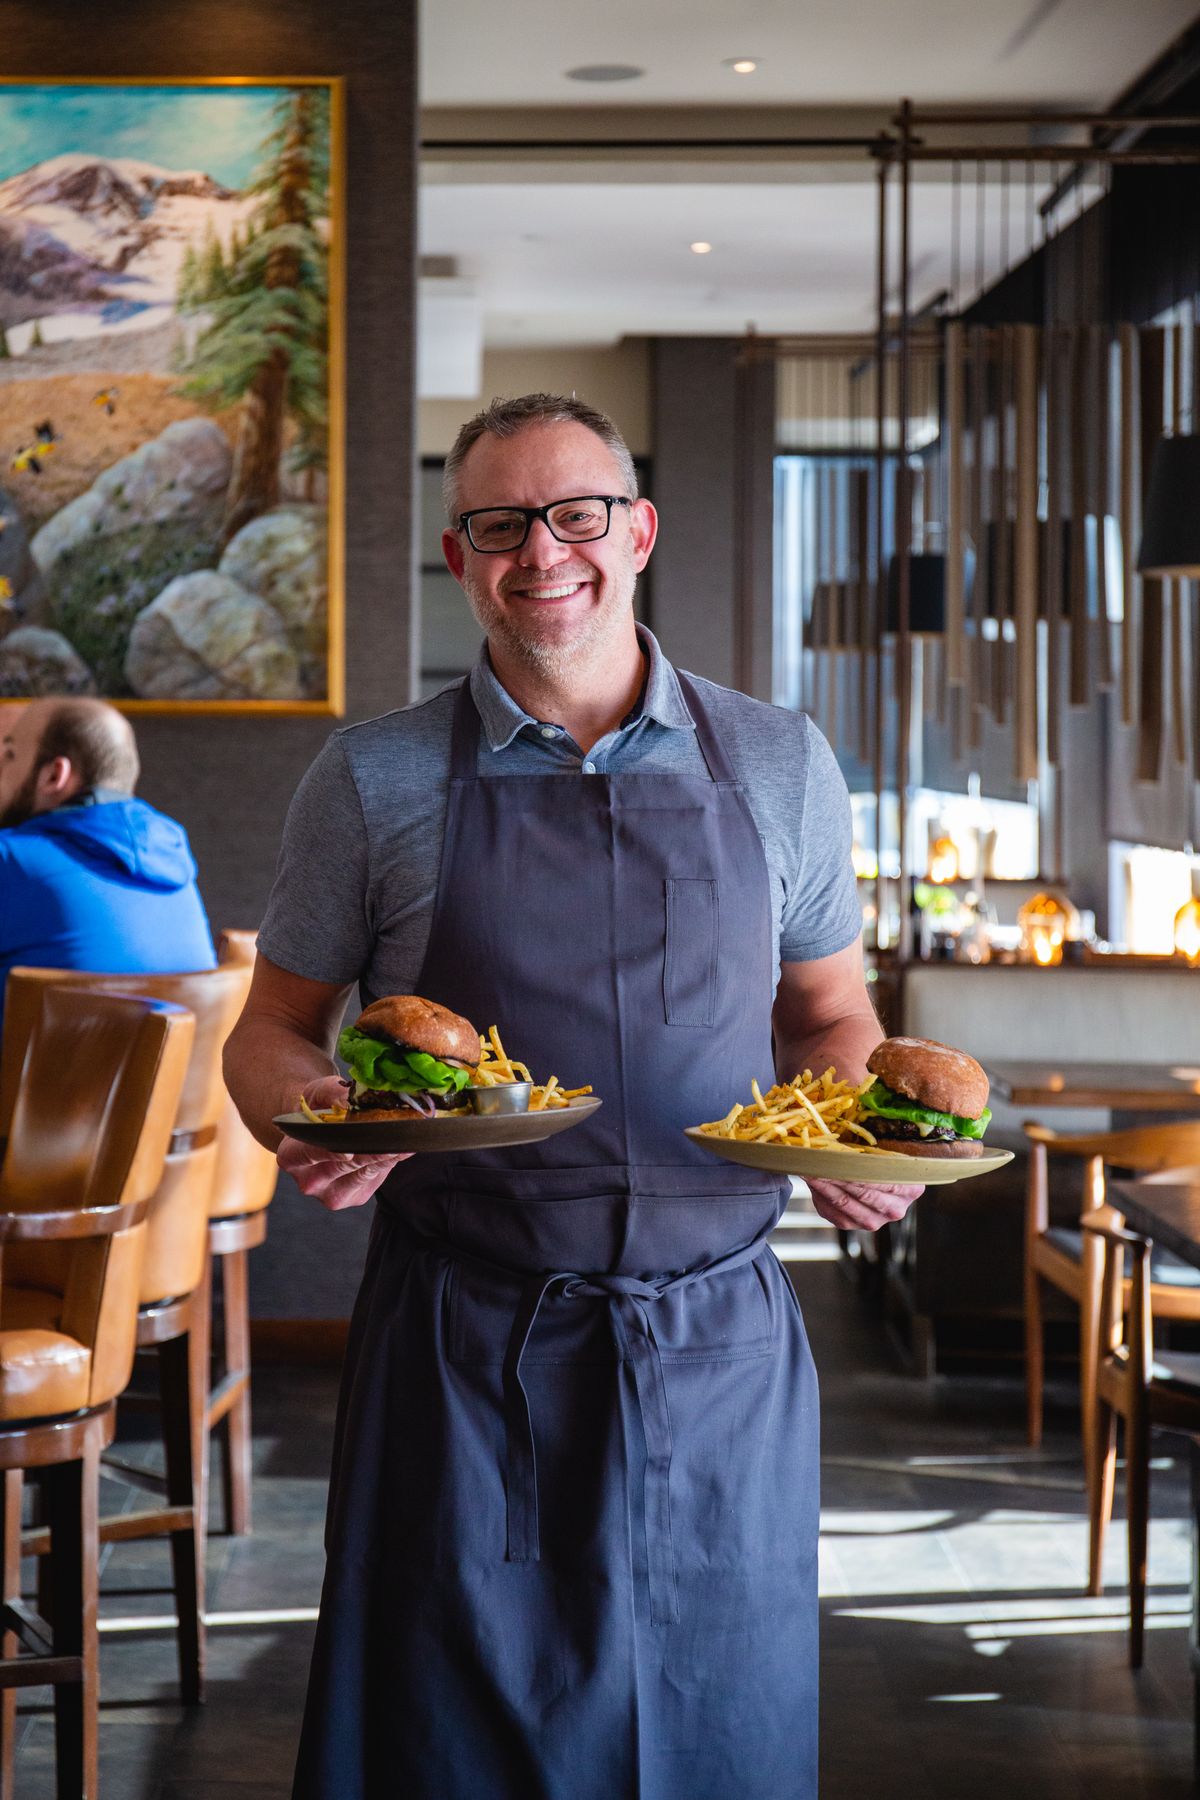 Seattle restaurateur Ethan Stowell can add two restaurants in Spokane to his group this month: Tavolata downtown and Bosco in the Wonder Building. (Ethan Stowell Restaurants)